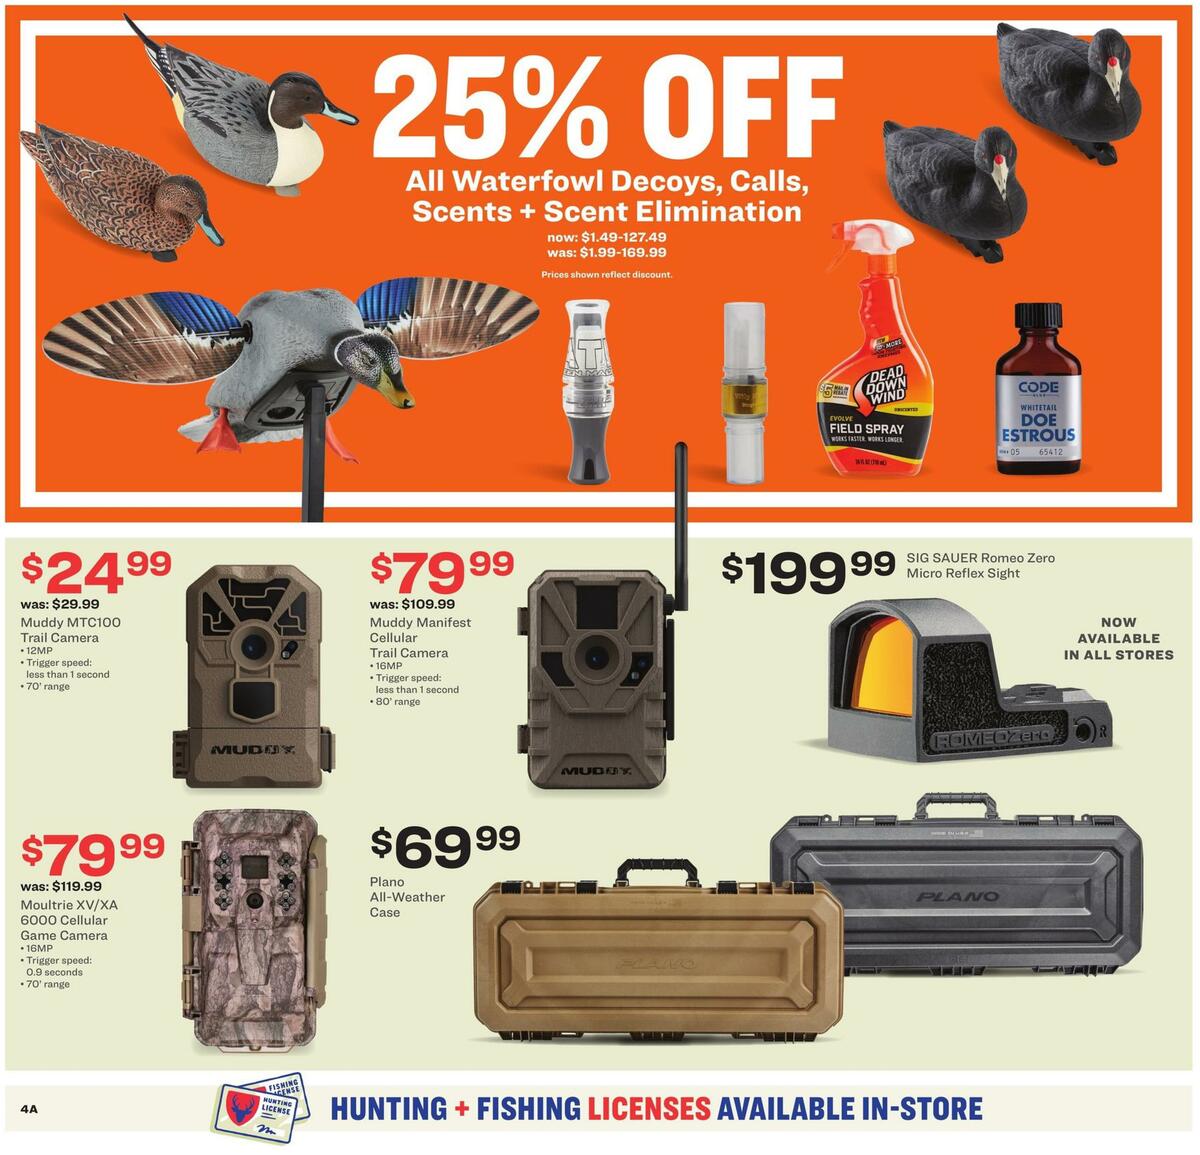 Academy Sports + Outdoors Outdoor Ad Weekly Ad from January 4